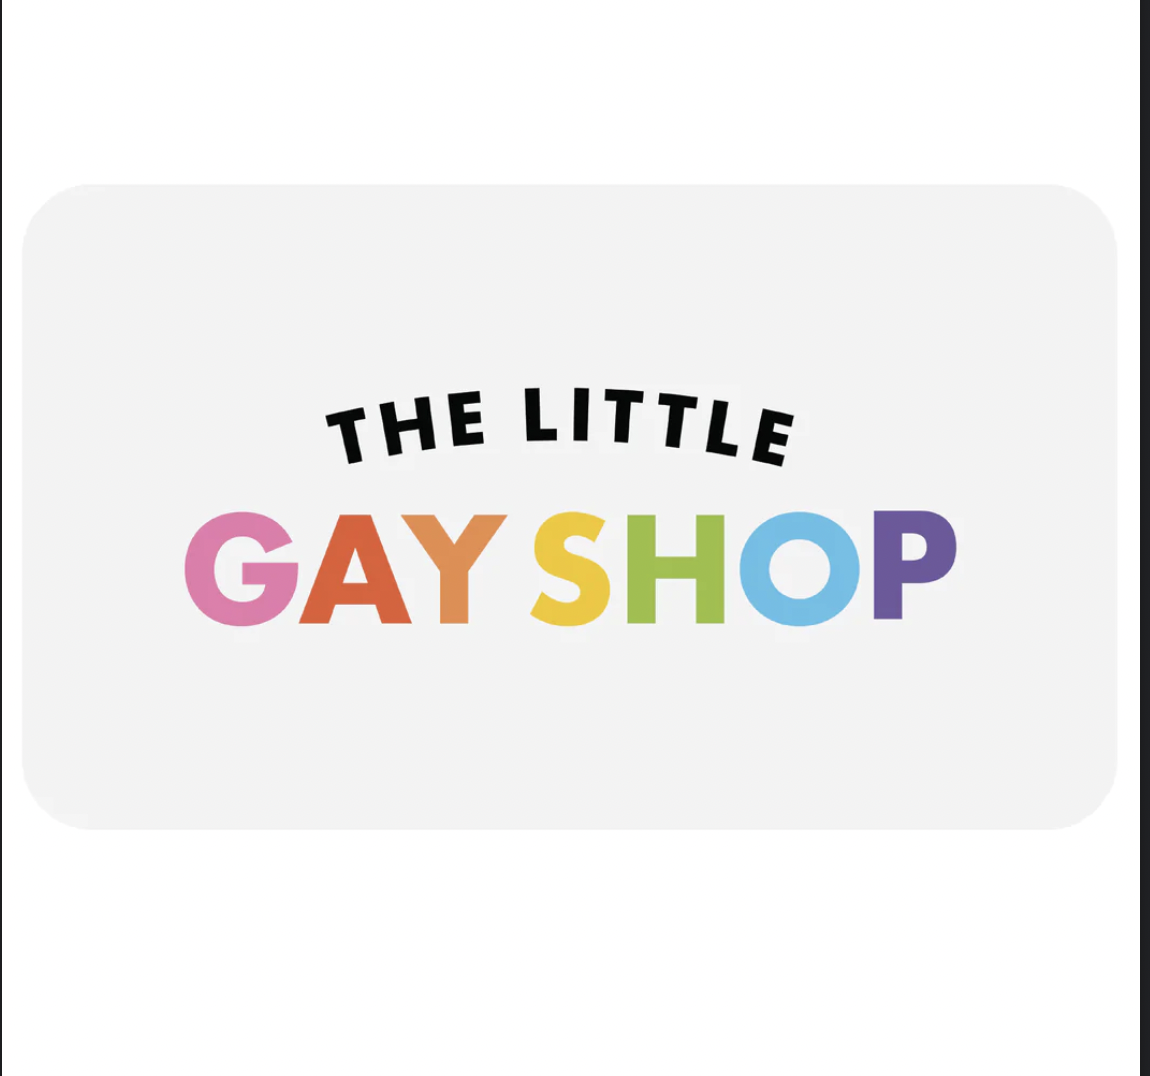 Image - The Little Gay Shop